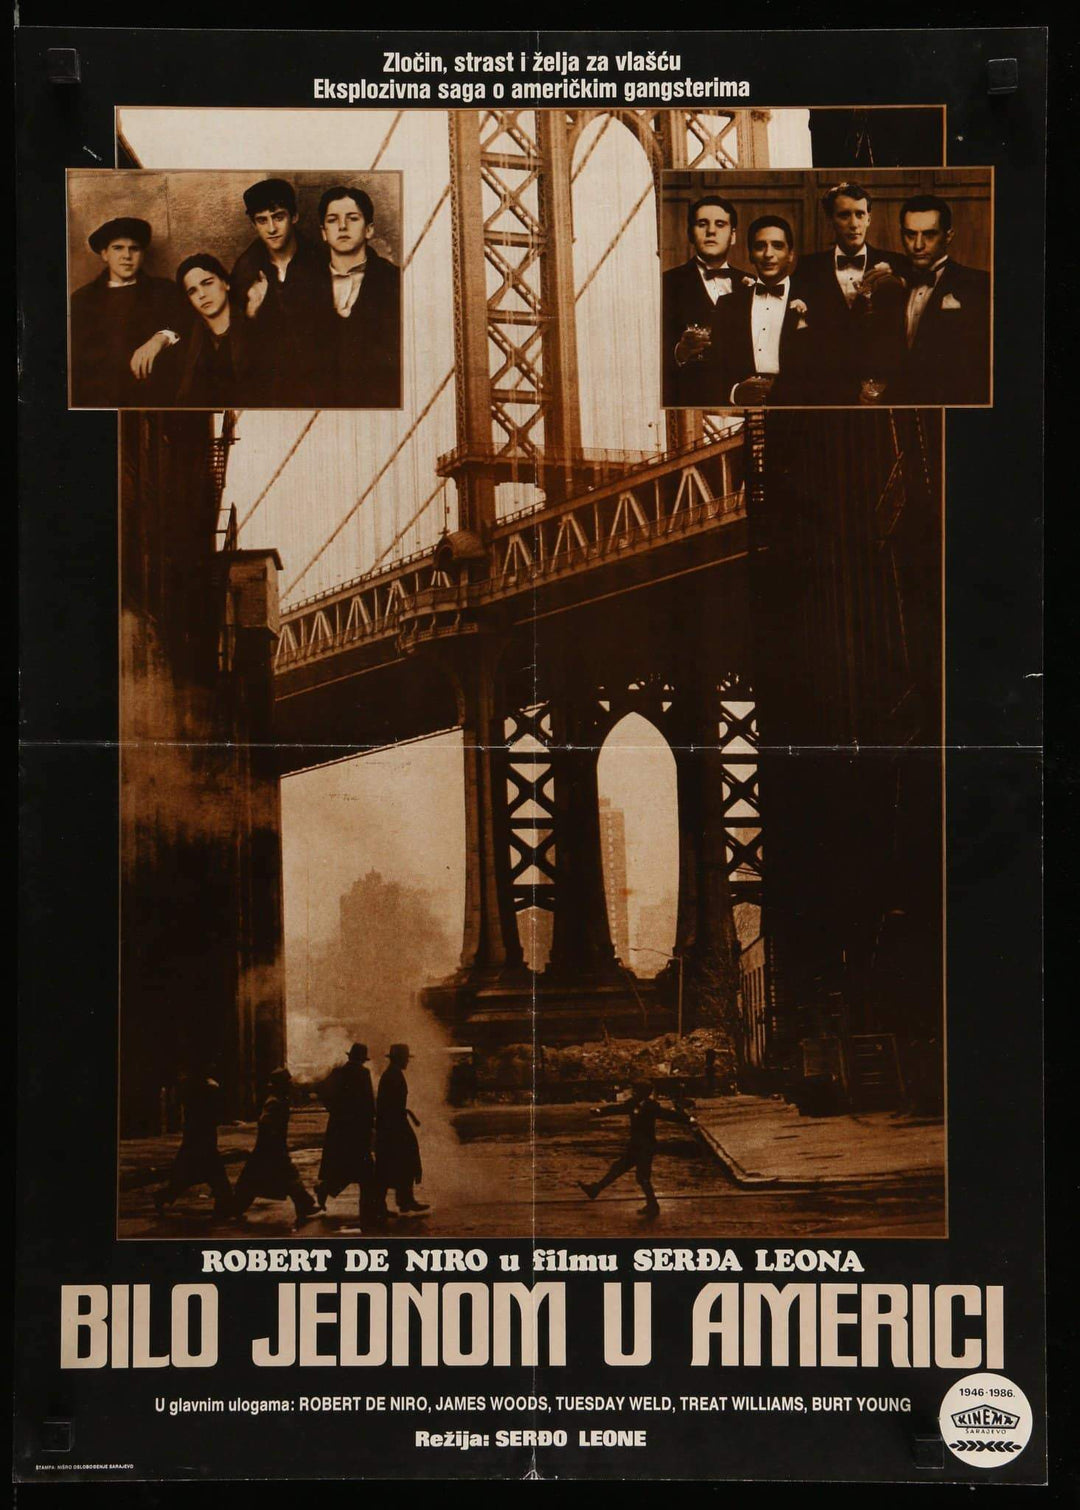 eArt/Film Once Upon A Time In America 1986 18x26 Sergio Leone Robert De Niro